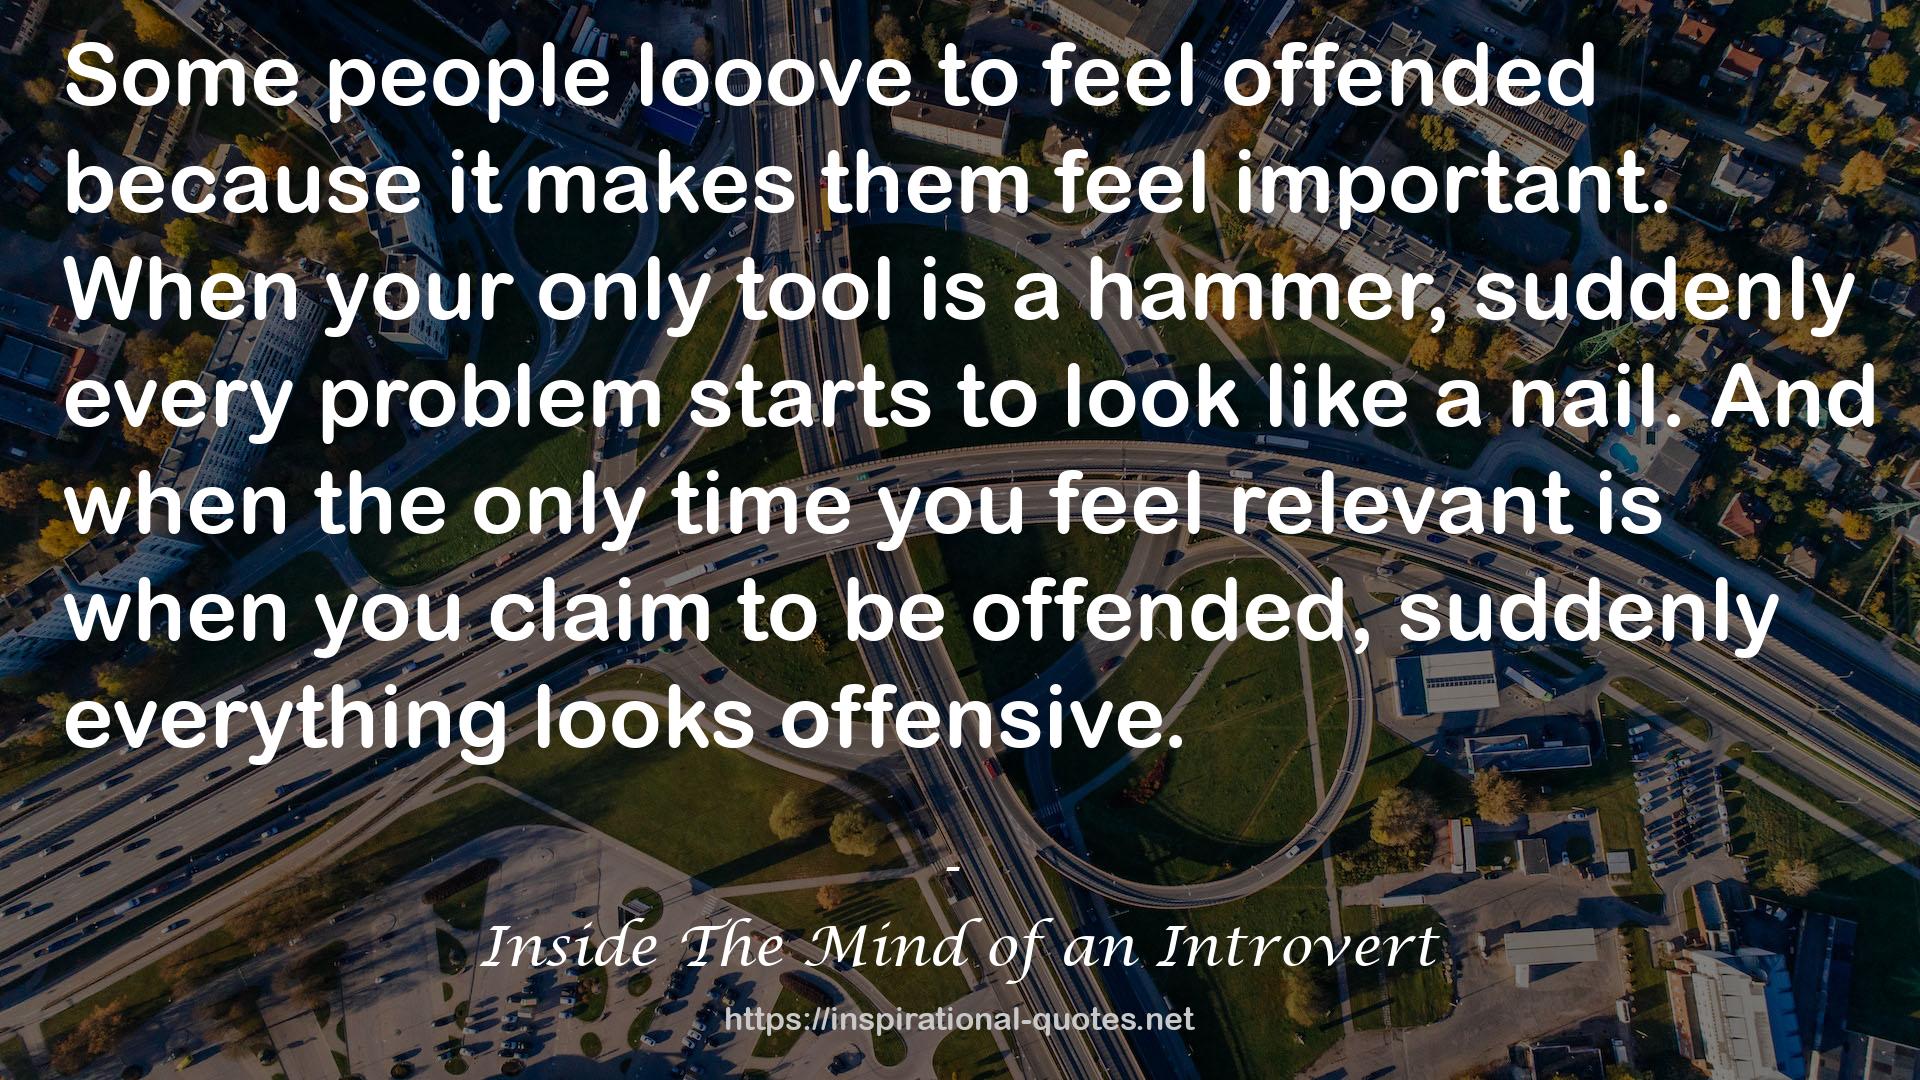 Inside The Mind of an Introvert QUOTES